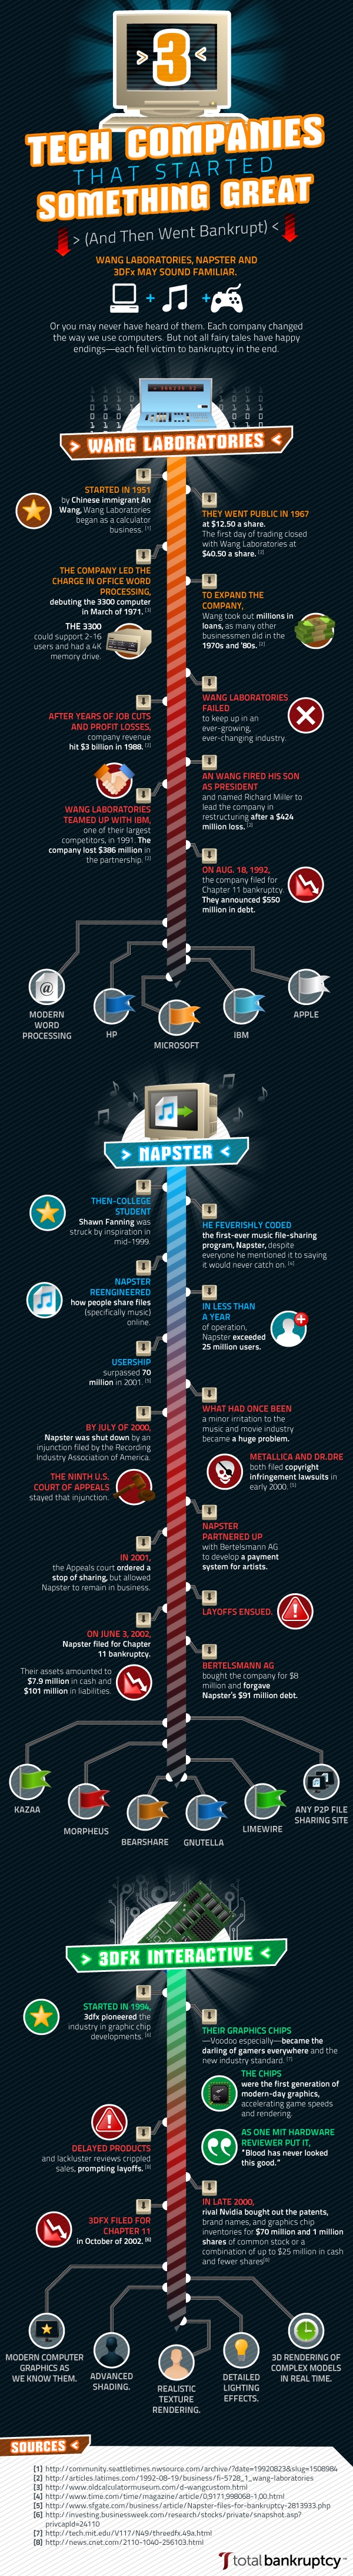 successful-tech-companies-bankruptcy-infographic